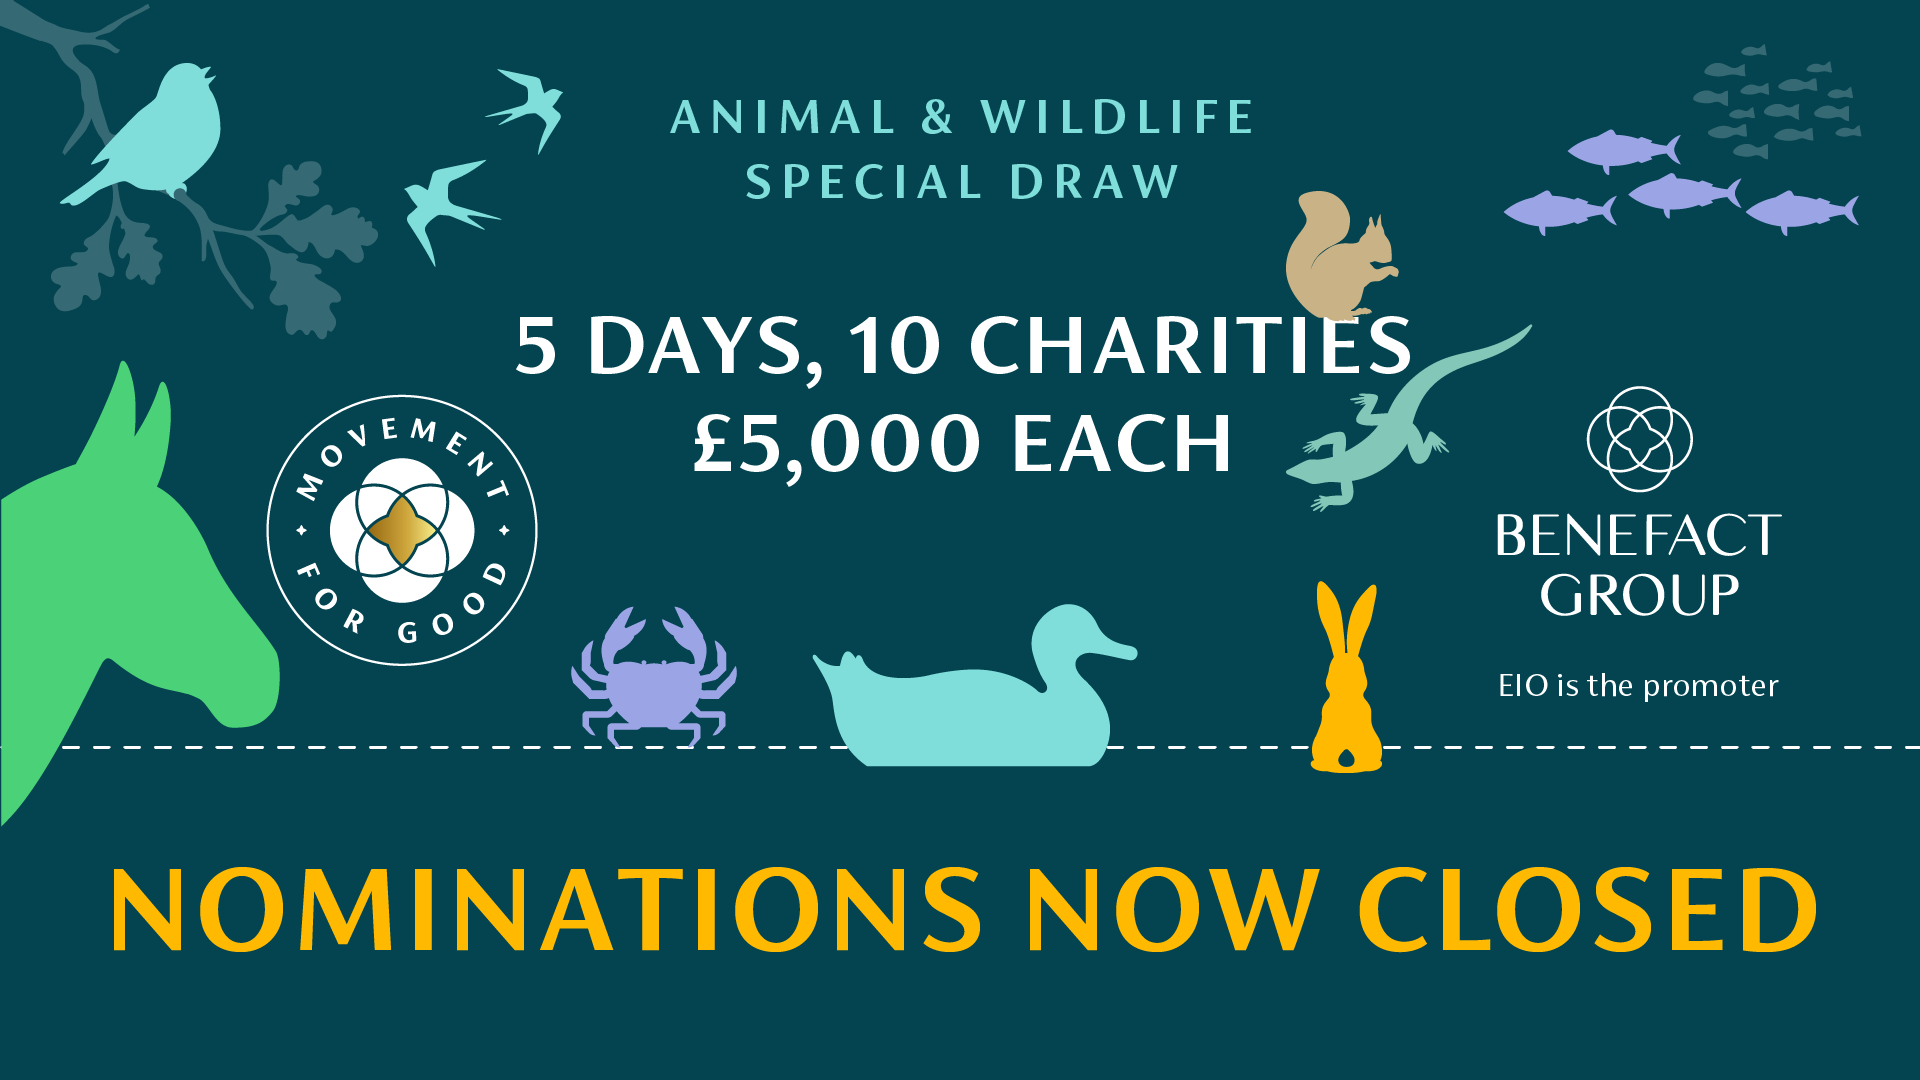 Animal Special Draw Nominations are now closed